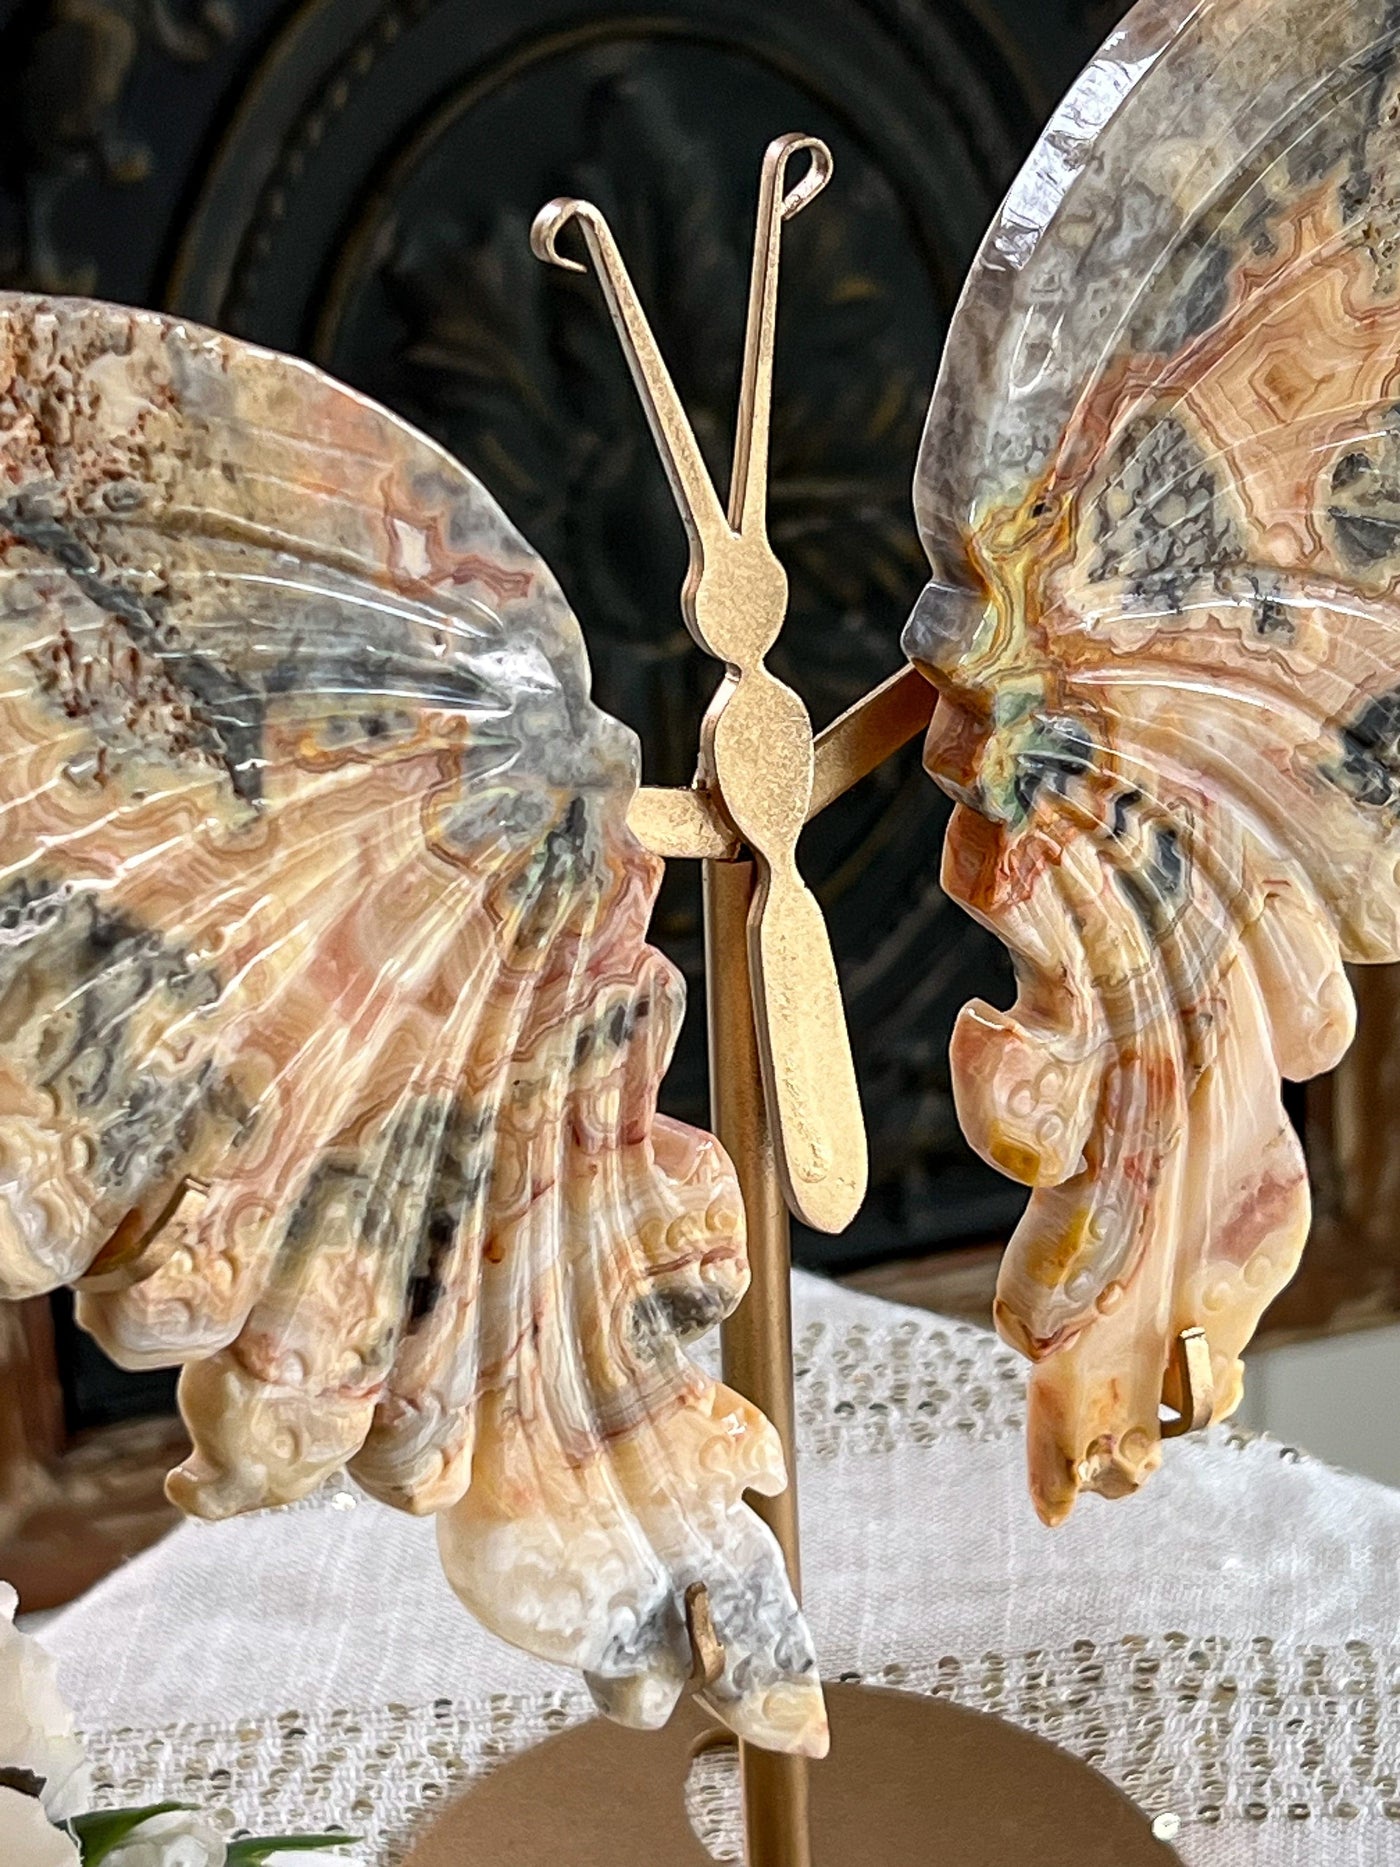 YELLOW CRAZY LACE AGATE BUTTERFLY WINGS ON STAND Revive In Style Vintage Furniture Painted Refinished Redesign Beautiful One of a Kind Artistic Antique Unique Home Decor Interior Design French Country Shabby Chic Cottage Farmhouse Grandmillenial Coastal Chalk Paint Metallic Glam Eclectic Quality Dovetailed Rustic Furniture Painter Pinterest Bedroom Living Room Entryway Kitchen Home Trends House Styles Decorating ideas